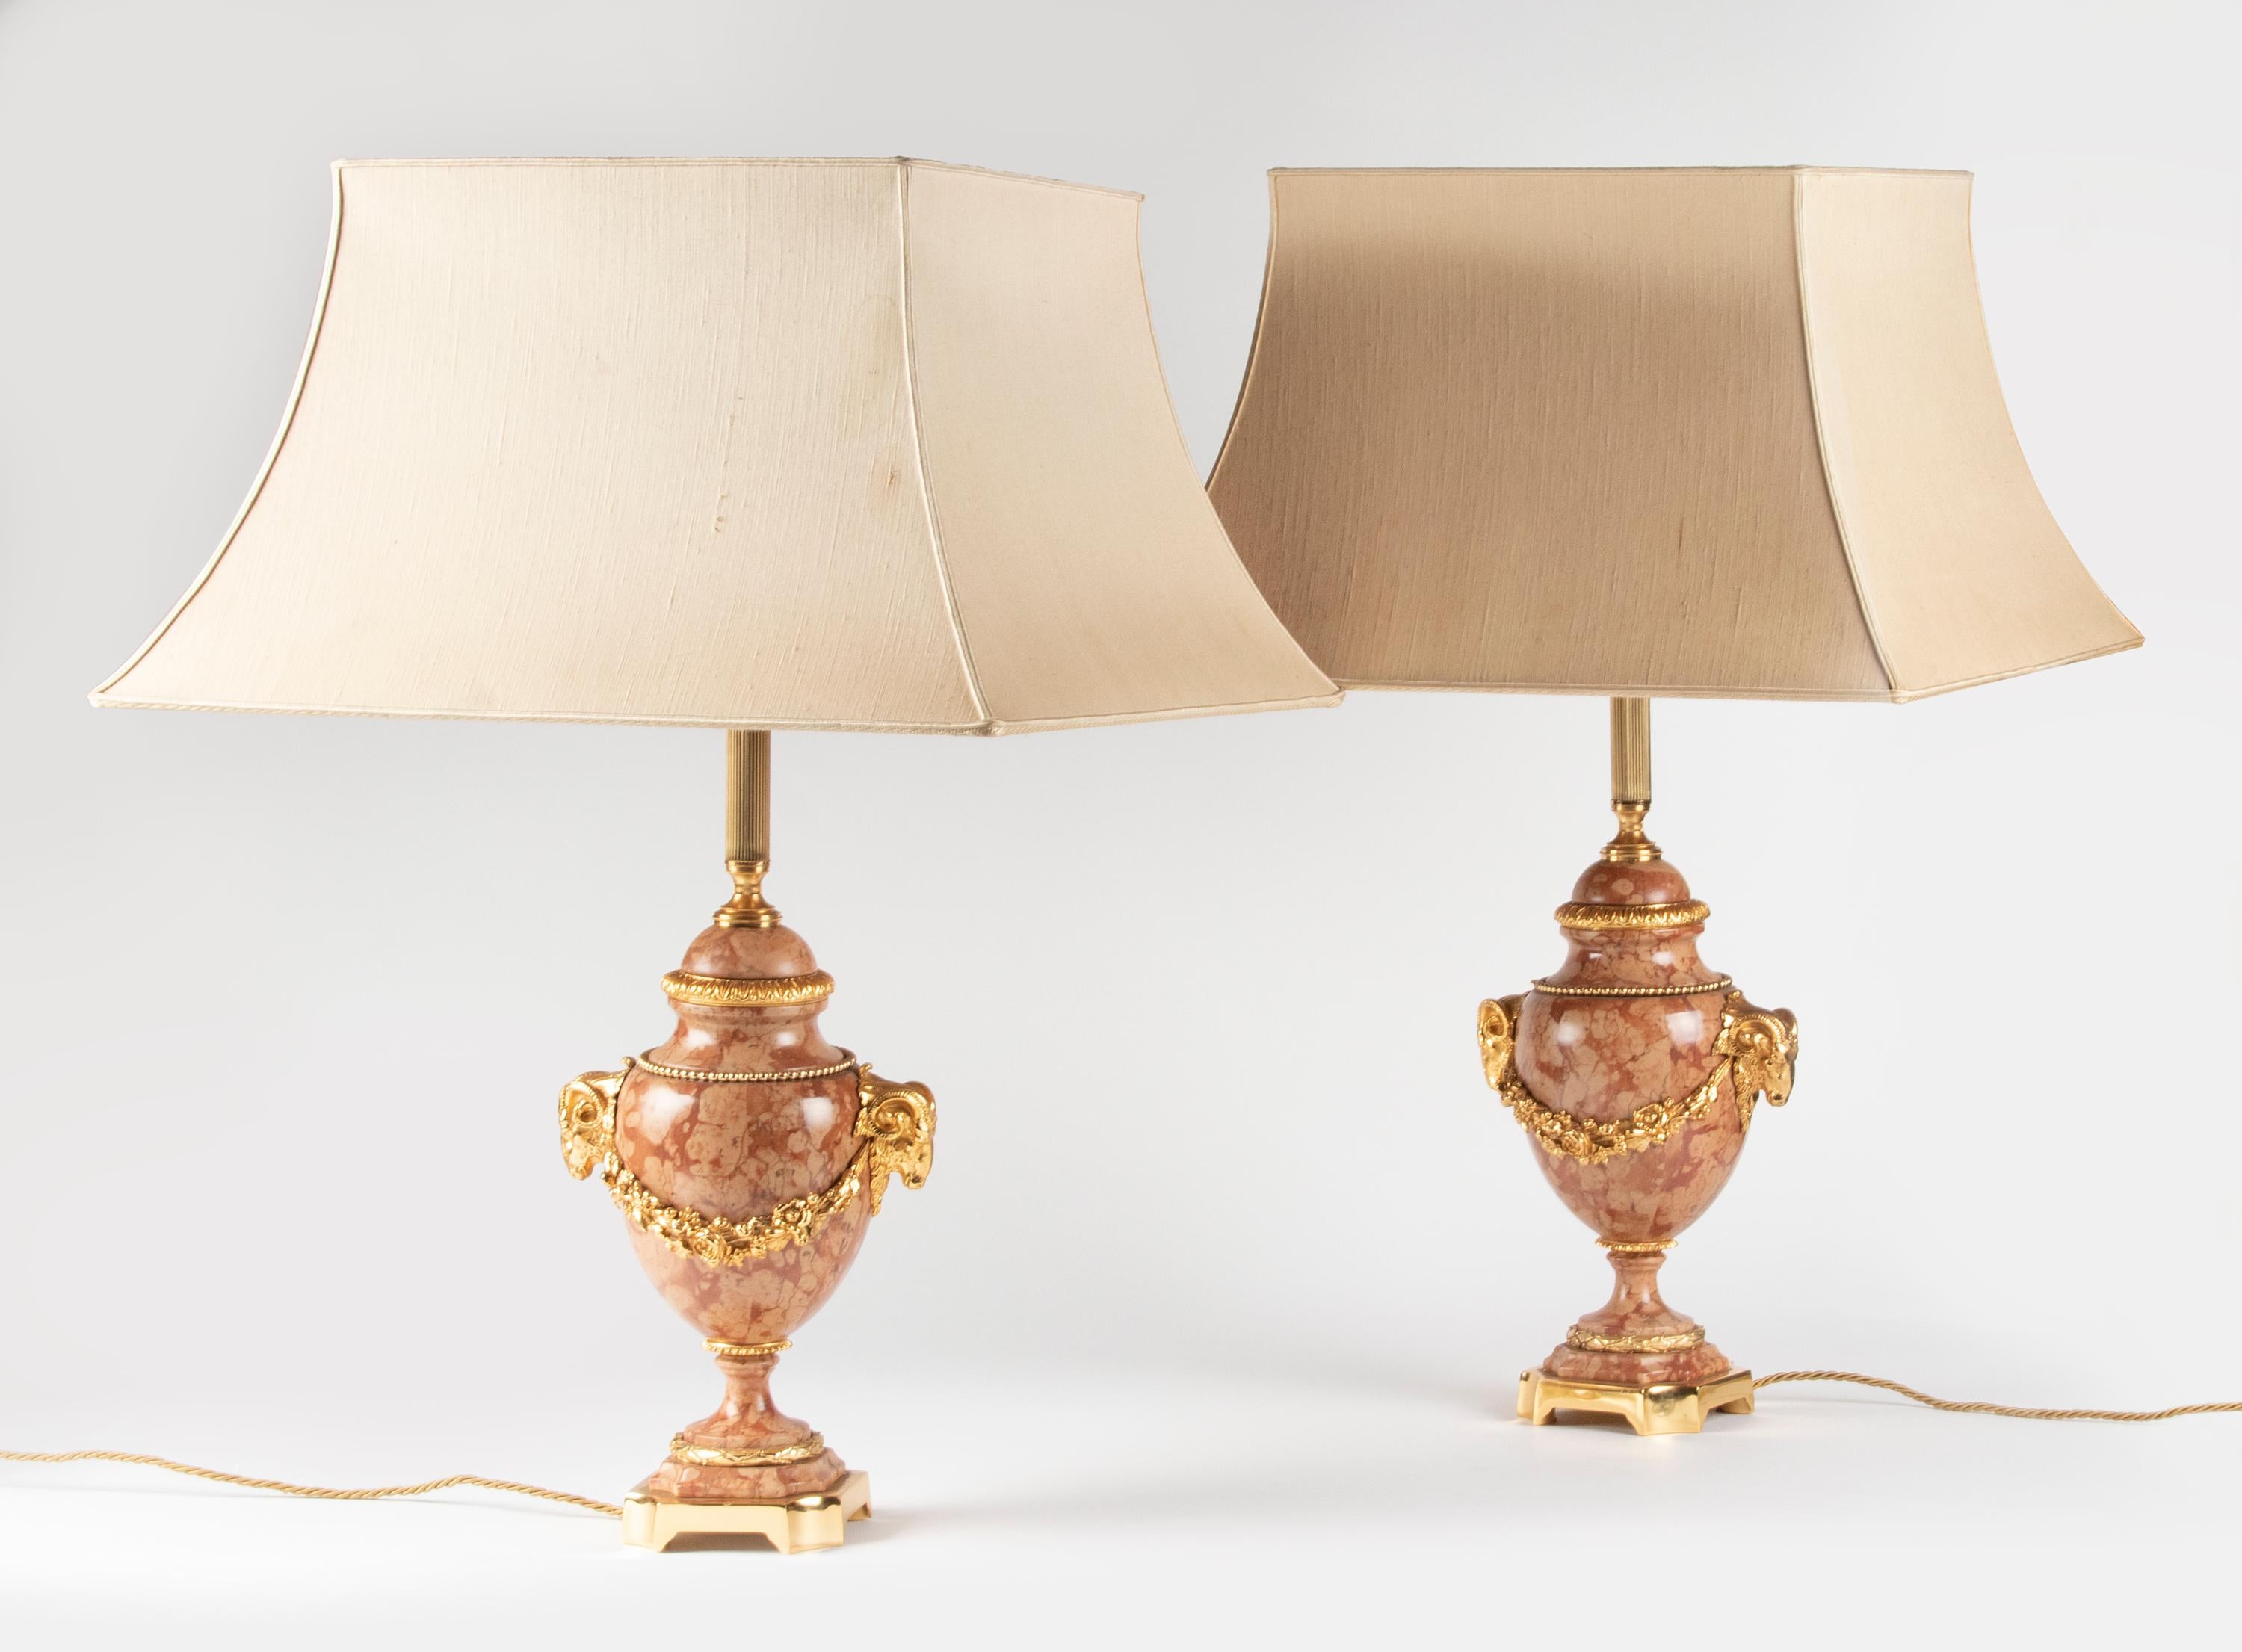 Two beautiful large lamps by the Italian brand Giulia Mangani. The lamps are made of metal, covered with faux Marble and gold-coloured ornaments. Inspired by a design from the French Louis XVI period. The lamps are fitted with large square caps. The